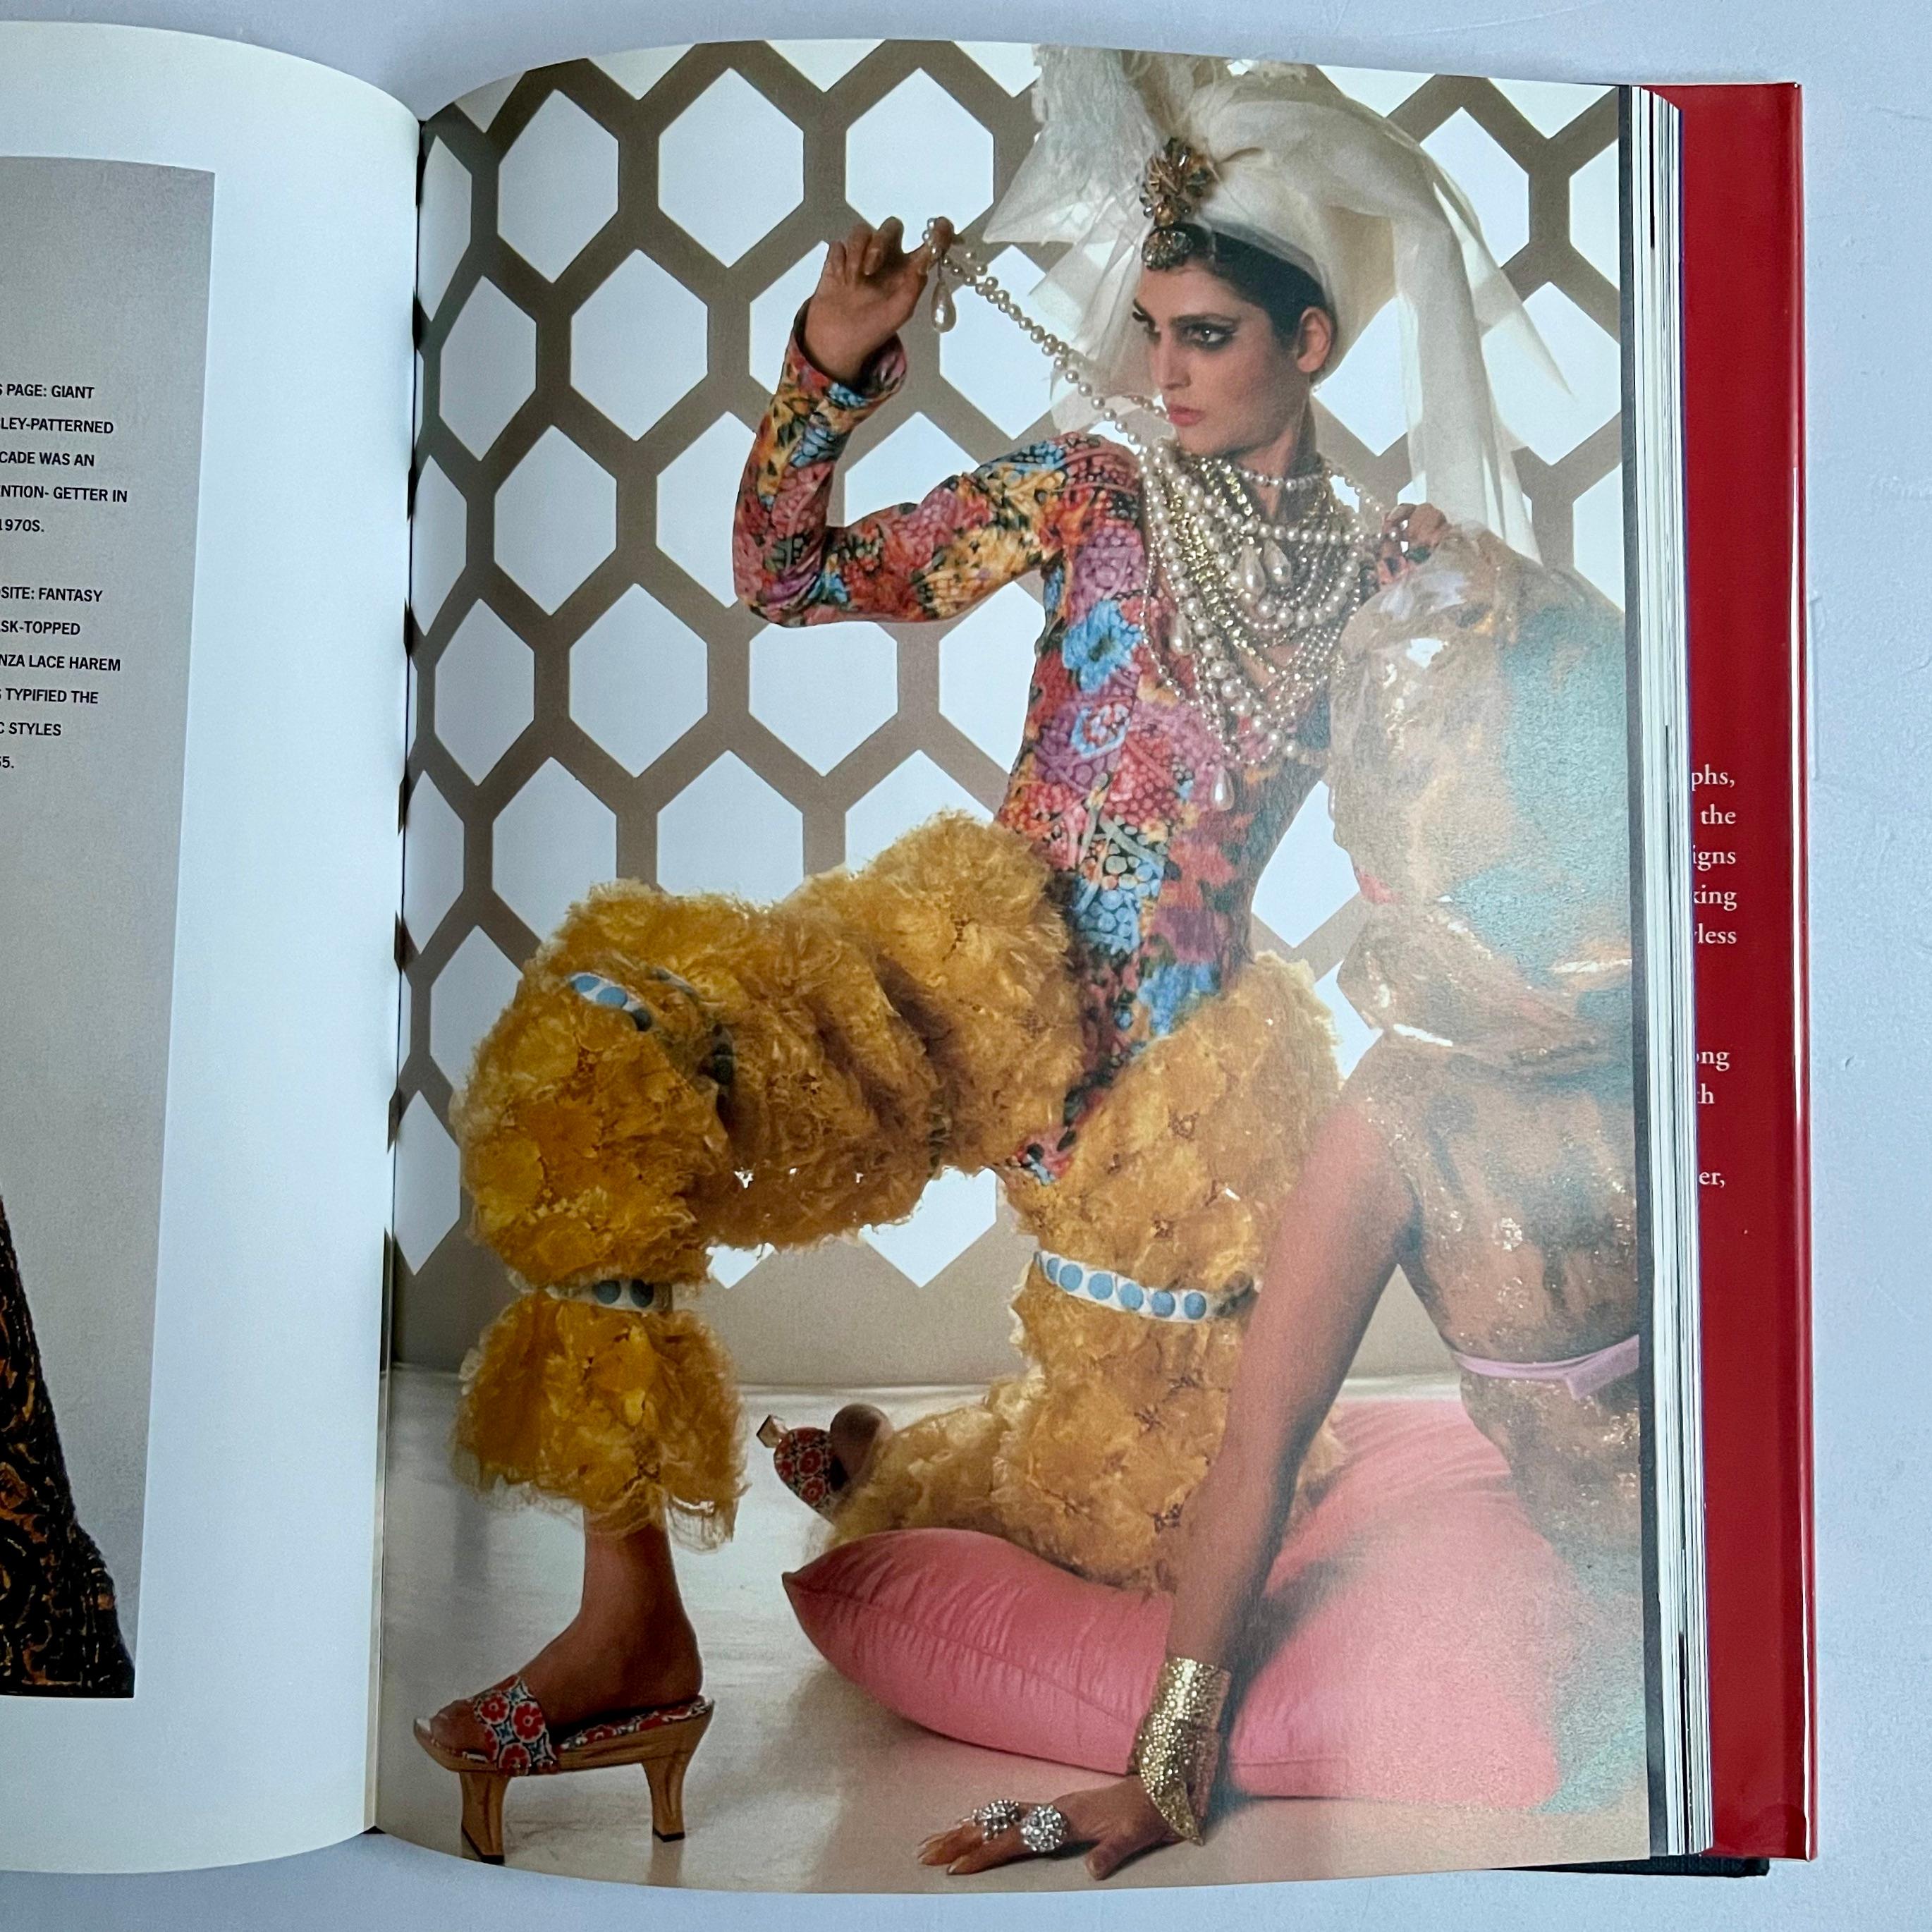 Published by Rizzoli, 1st edition, 1996

Scaasi was known for his impeccably tailored suits and glamorous evening wear and cocktail dresses trimmed with feathers, fur, sequins, or fine embroidery—and an equally exuberant personality to boot. In